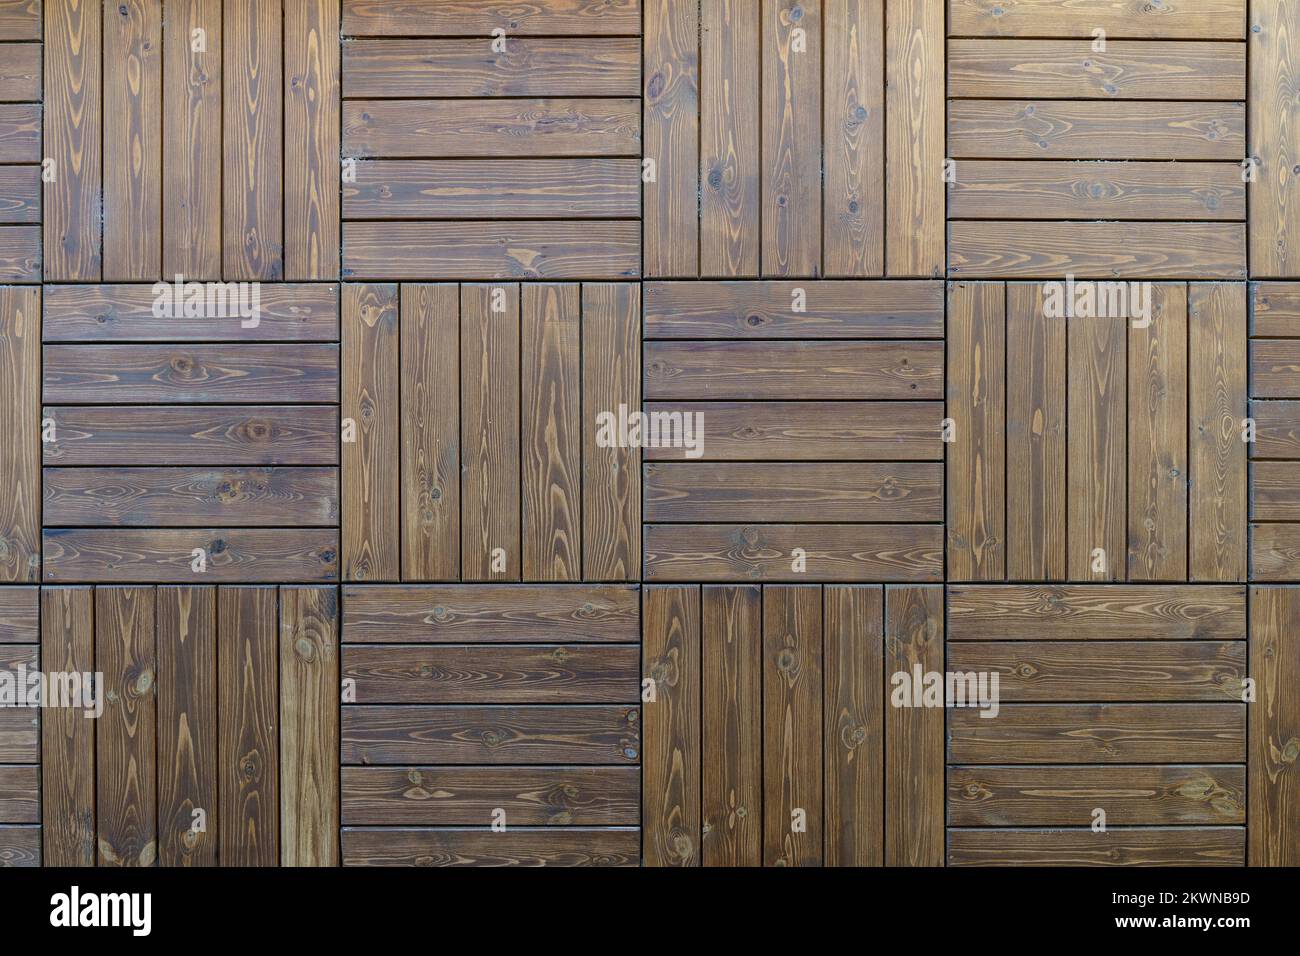 Wooden planks background wall. Textured rustic wood old paneling for walls, interiors and construction. High quality photo Stock Photo